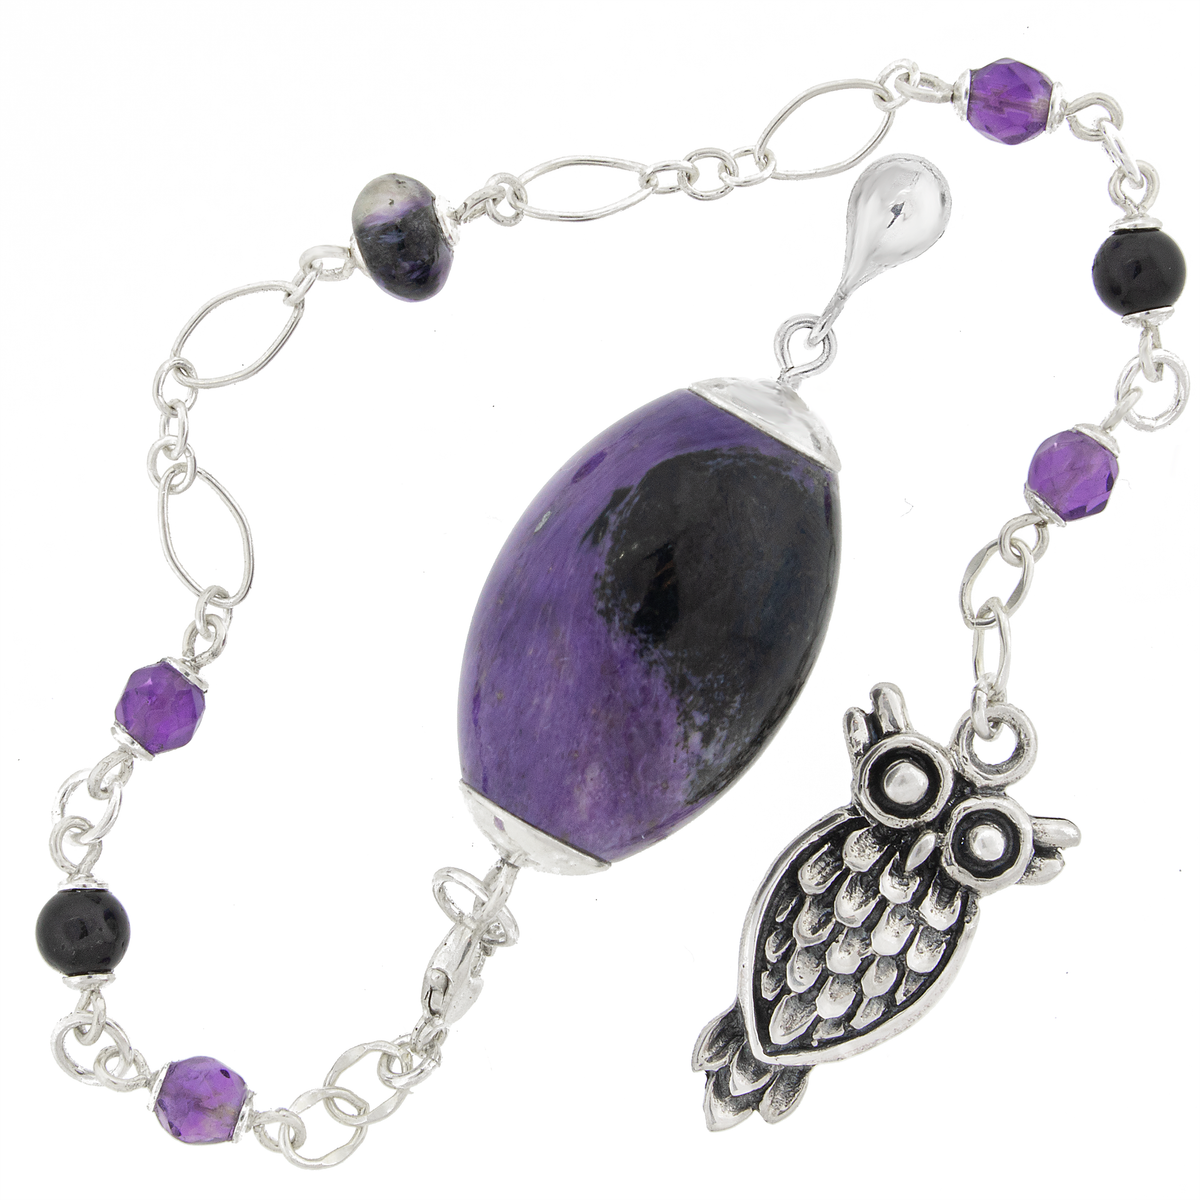 One of a Kind #370 - Charoite, Amethyst, Black Obsidian and Sterling Silver Pendulum by Ask Your Pendulum